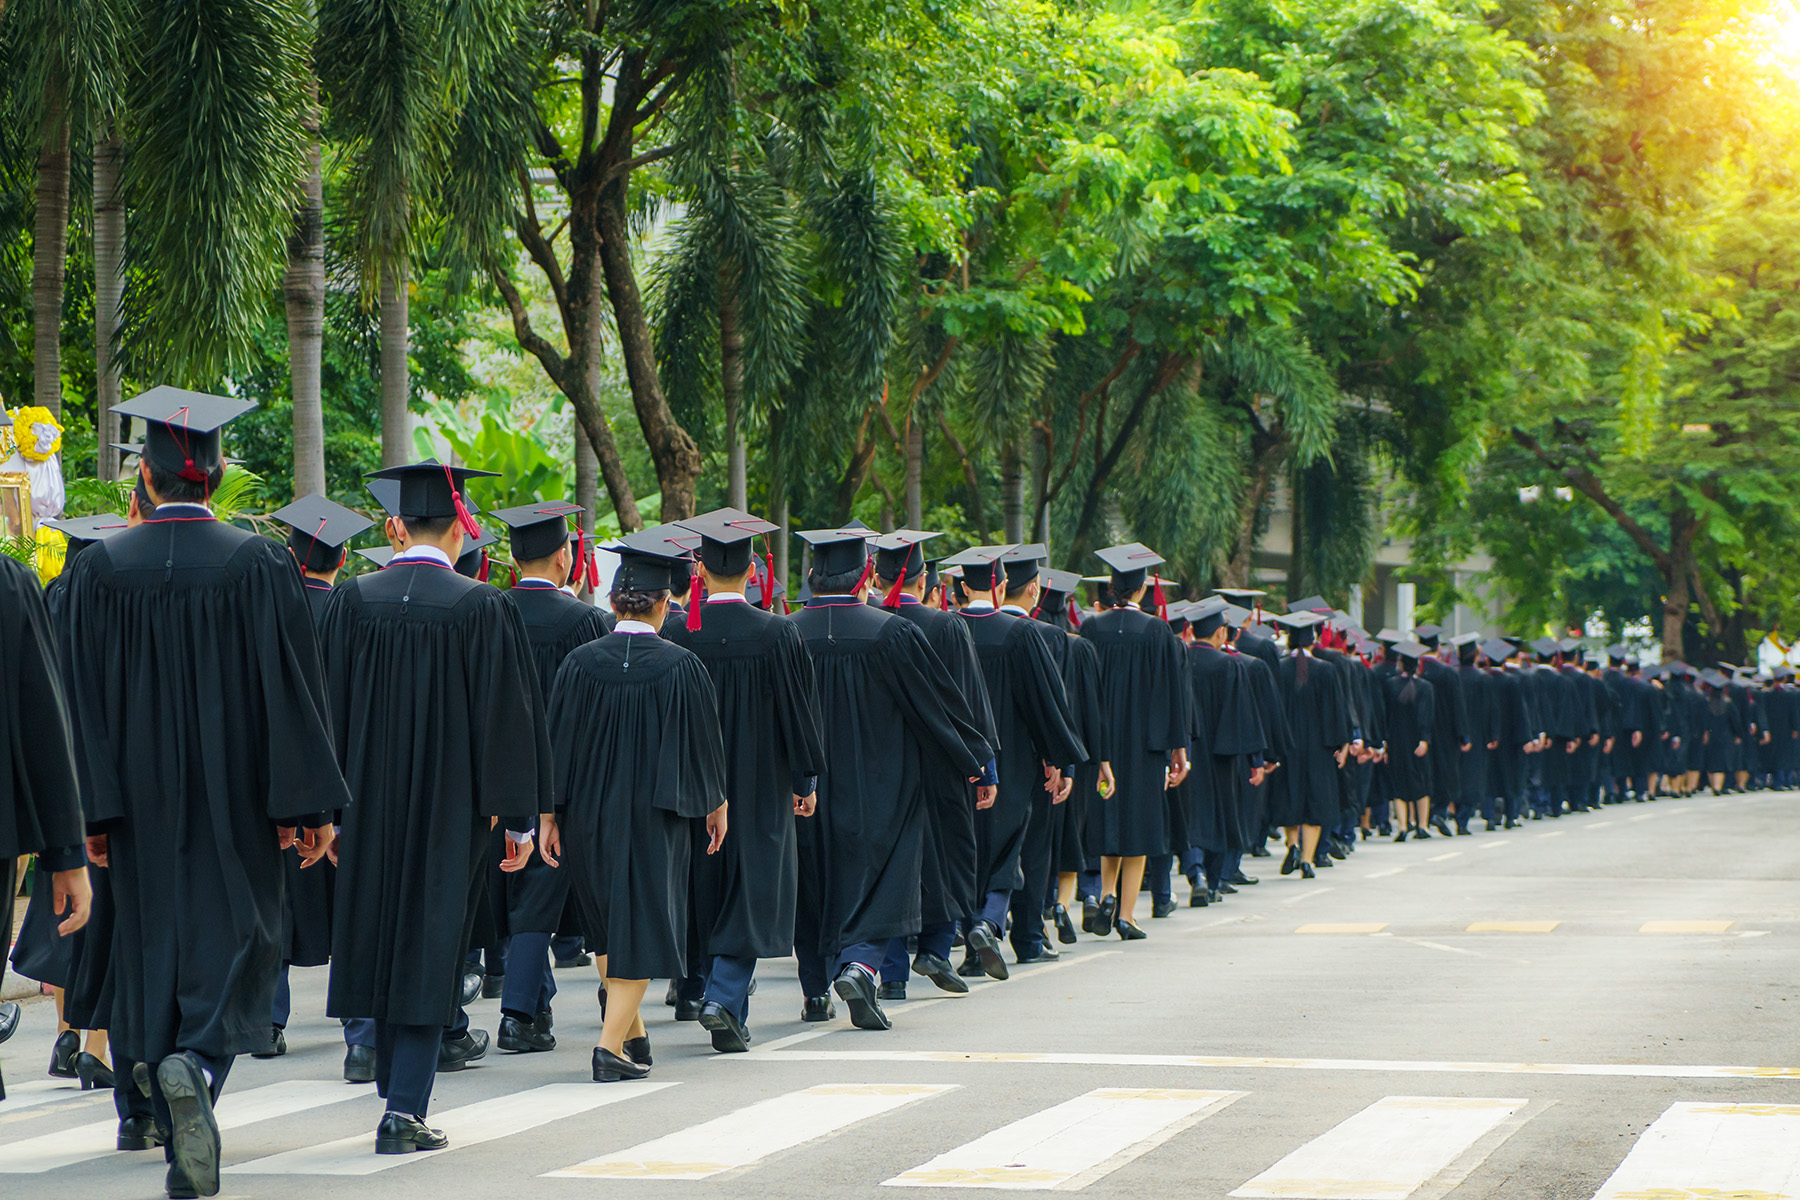 Graduates in caps and gowns walk down the street away from camera